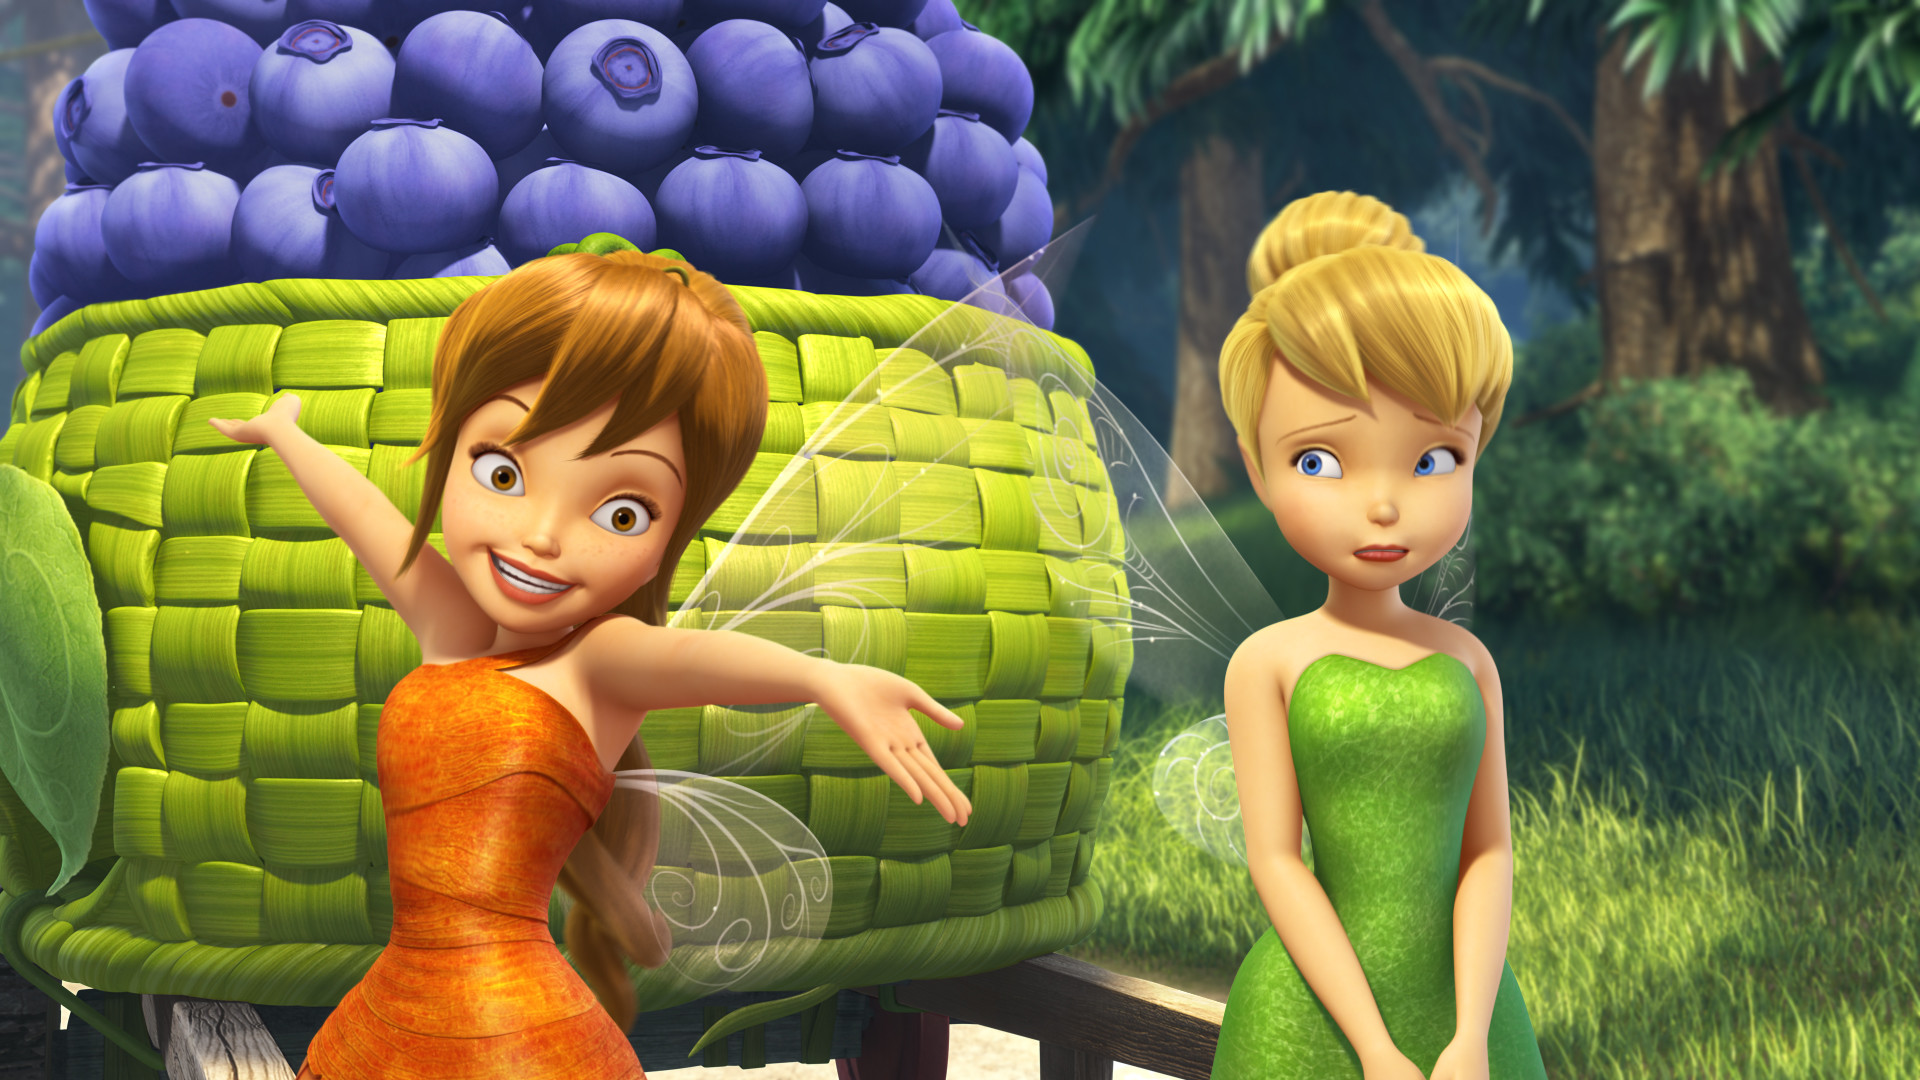 1920x1080 Tinker Bell:Legend of the NeverBeast images Legend of the NeverBeast - Fawn  and TinkerBell HD wallpaper and background photos